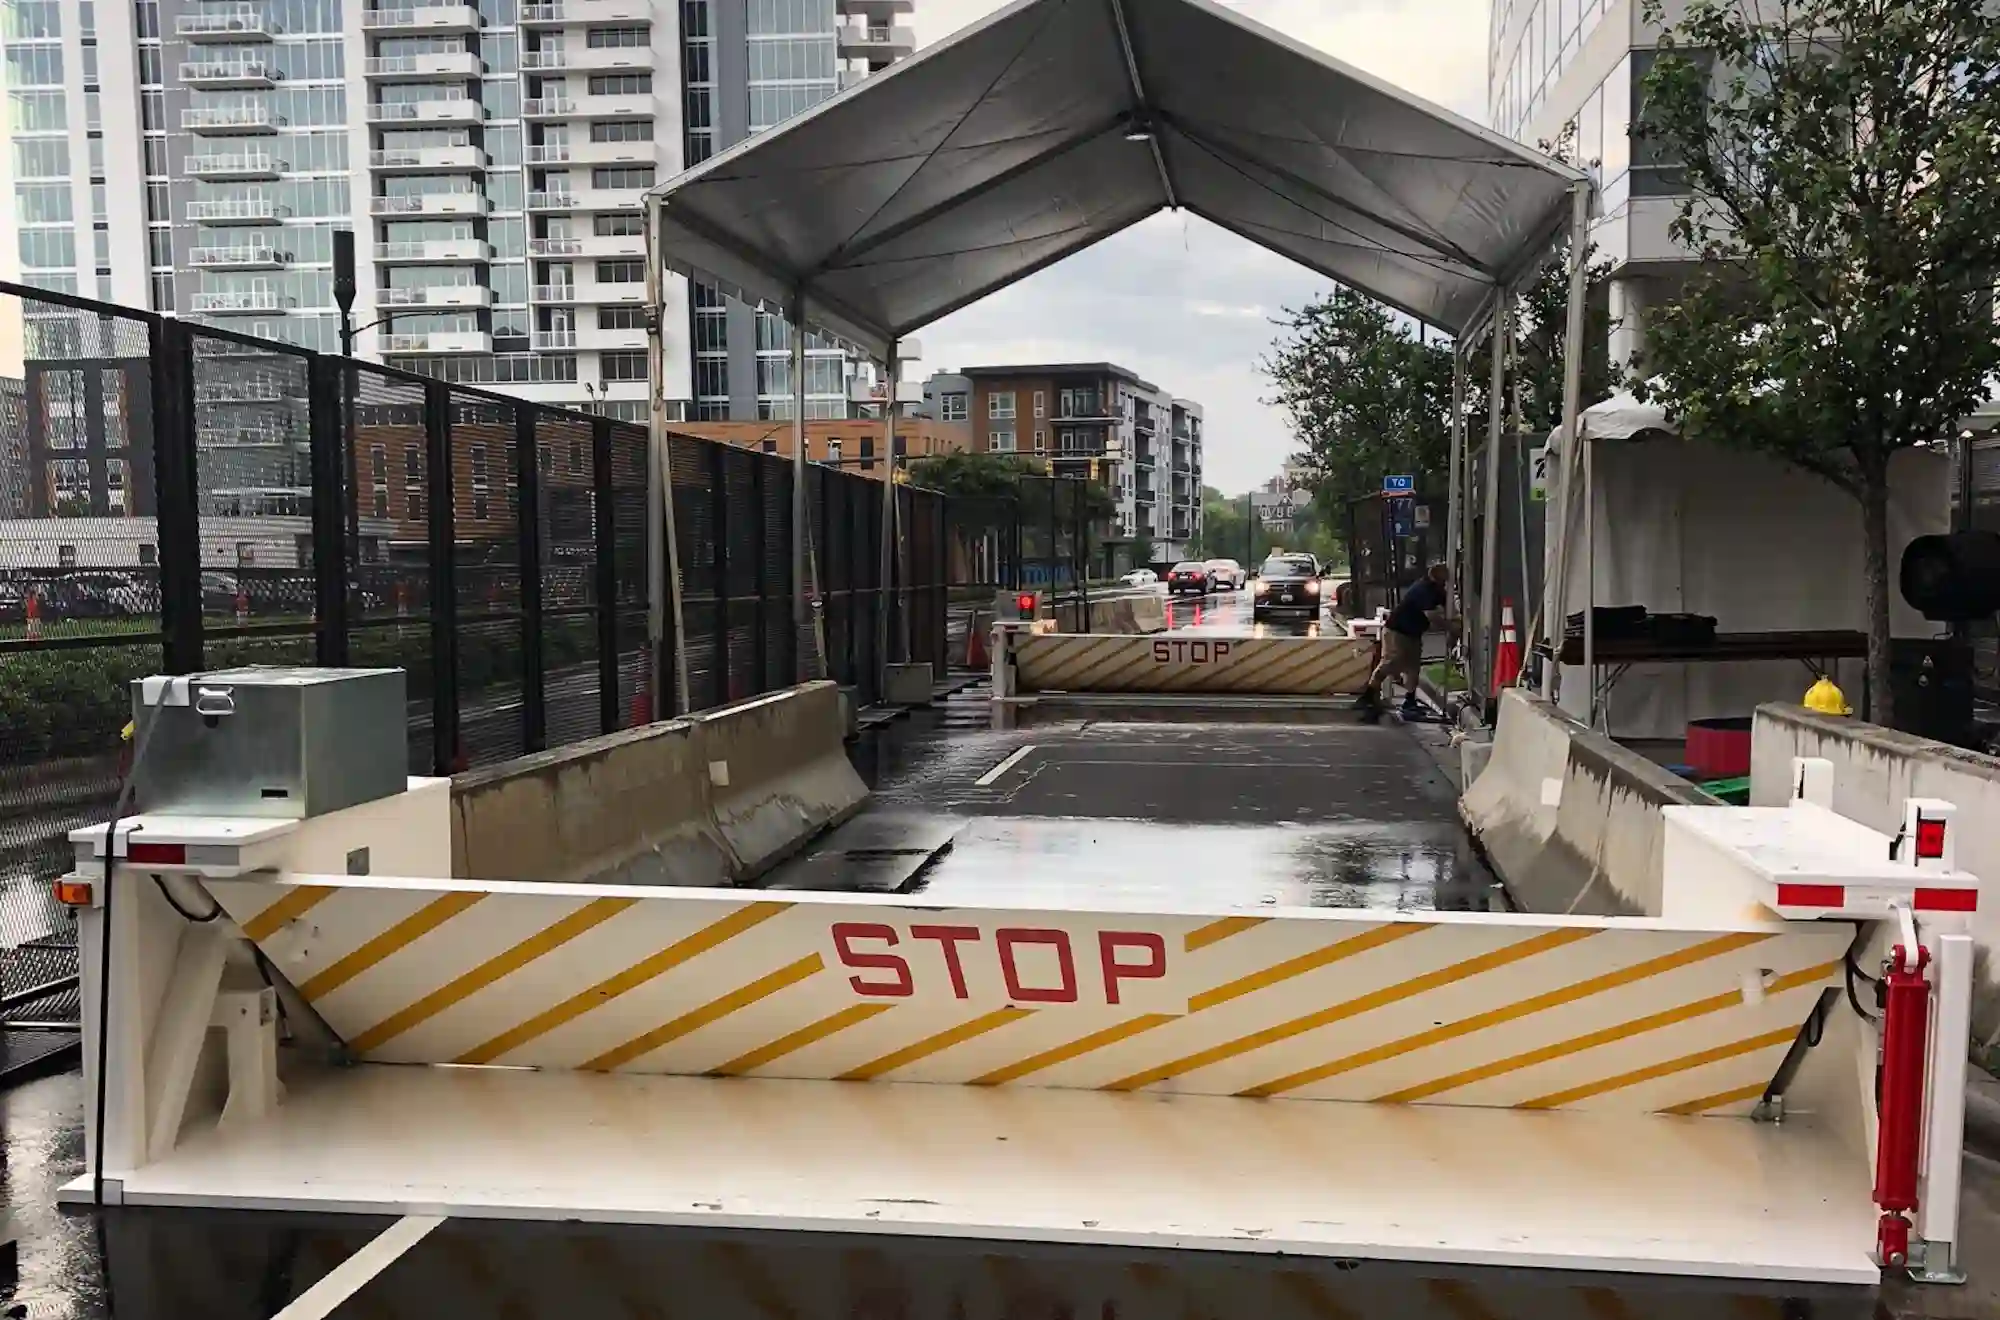 Security checkpoint with Delta Scientific's surface-mounted wedge barriers under a canopy, in an urban setting with modern buildings in the background, ensuring the safety of events and public gatherings.